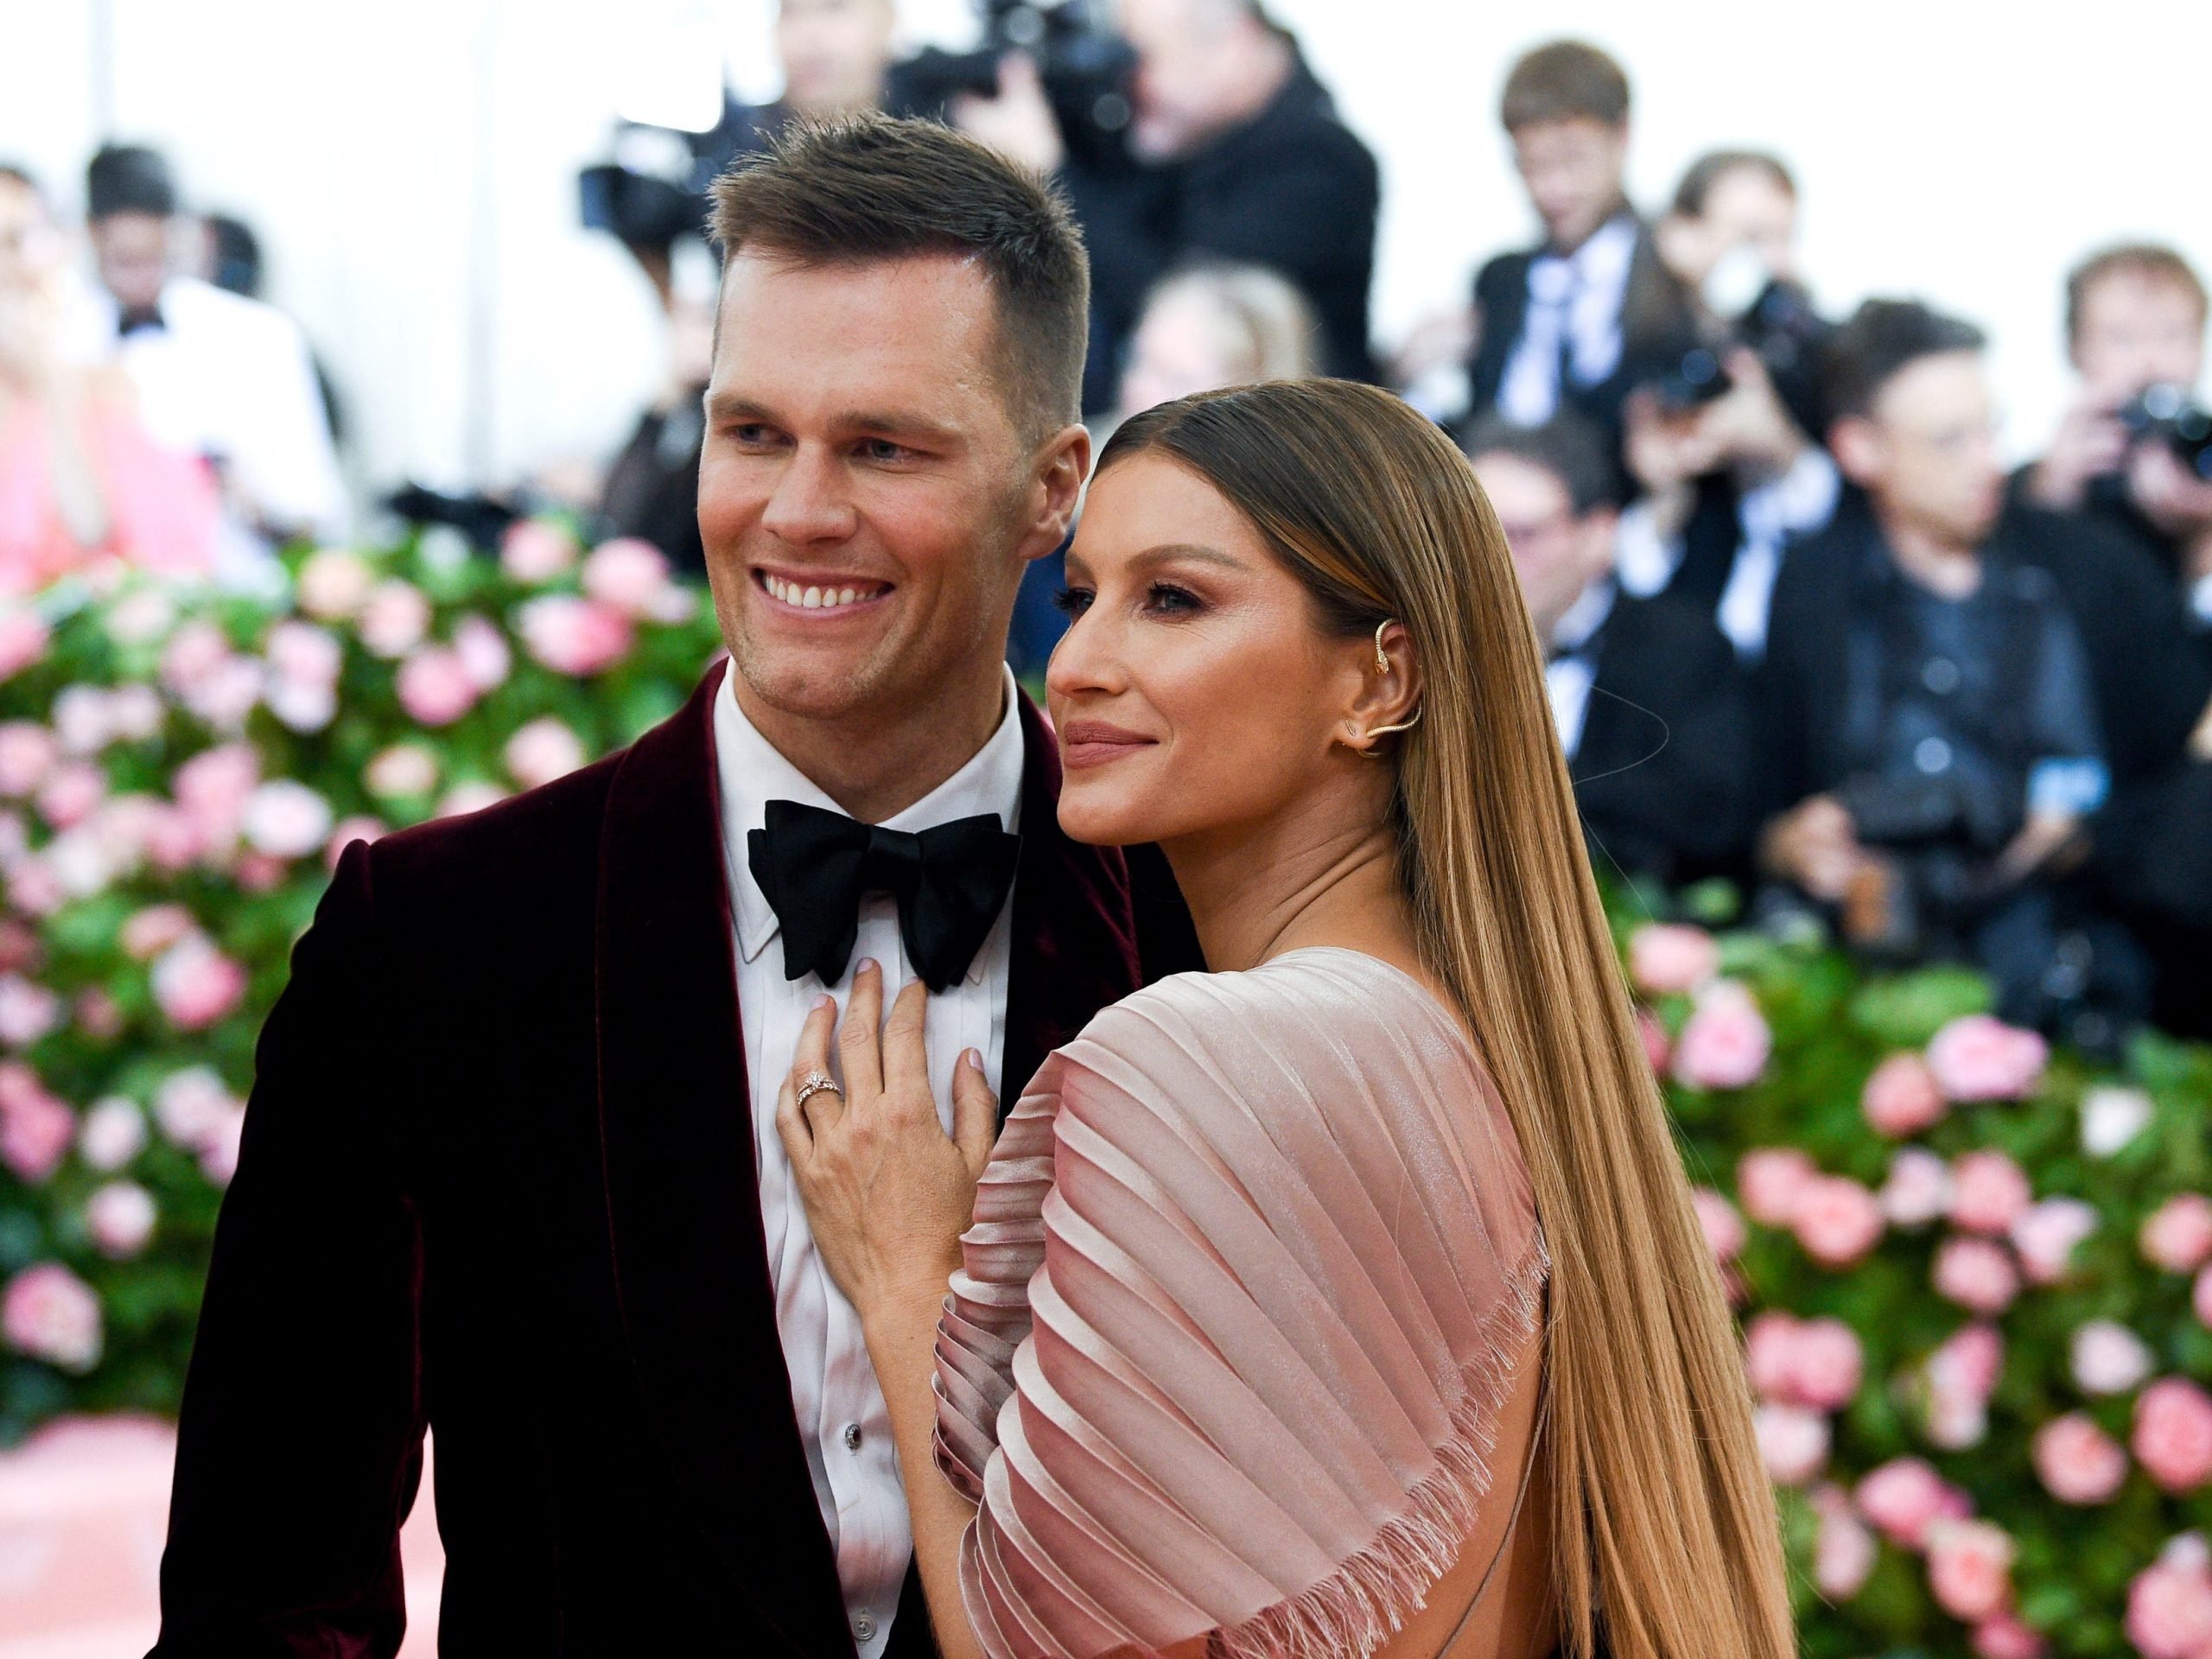 Tom Brady, left, and Gisele Bundchen attend The Metropolitan Museum of Art's Costume Institute benefit gala celebrating the opening of the "Camp: Notes on Fashion" exhibition on Monday, May 6, 2019, in New York.